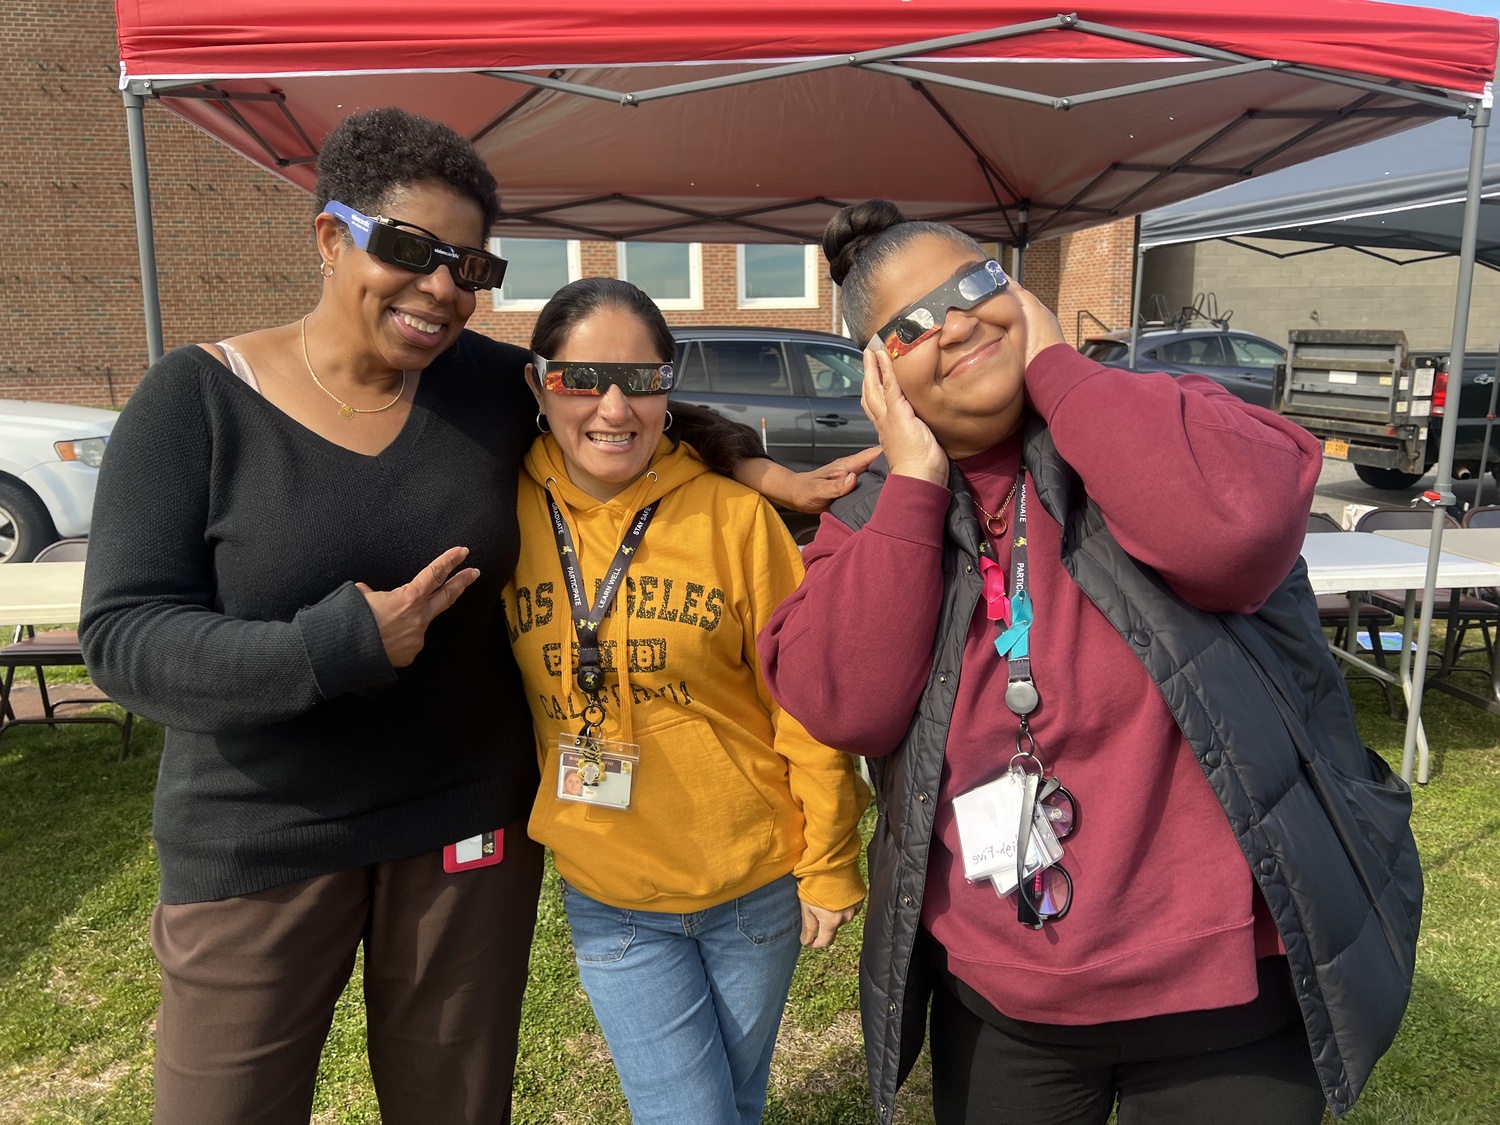 Bridgehampton Union Free School District and community members gathered for a showing of the solar eclipse on April 8. With the protection of eclipse glasses, everyone was able to witness the incredible event. Faculty members Giles Gay, Fubia Garcia and Adrienne Gholson. COURTESY BRIDGEHAMPTON SCHOOL DISTRICT